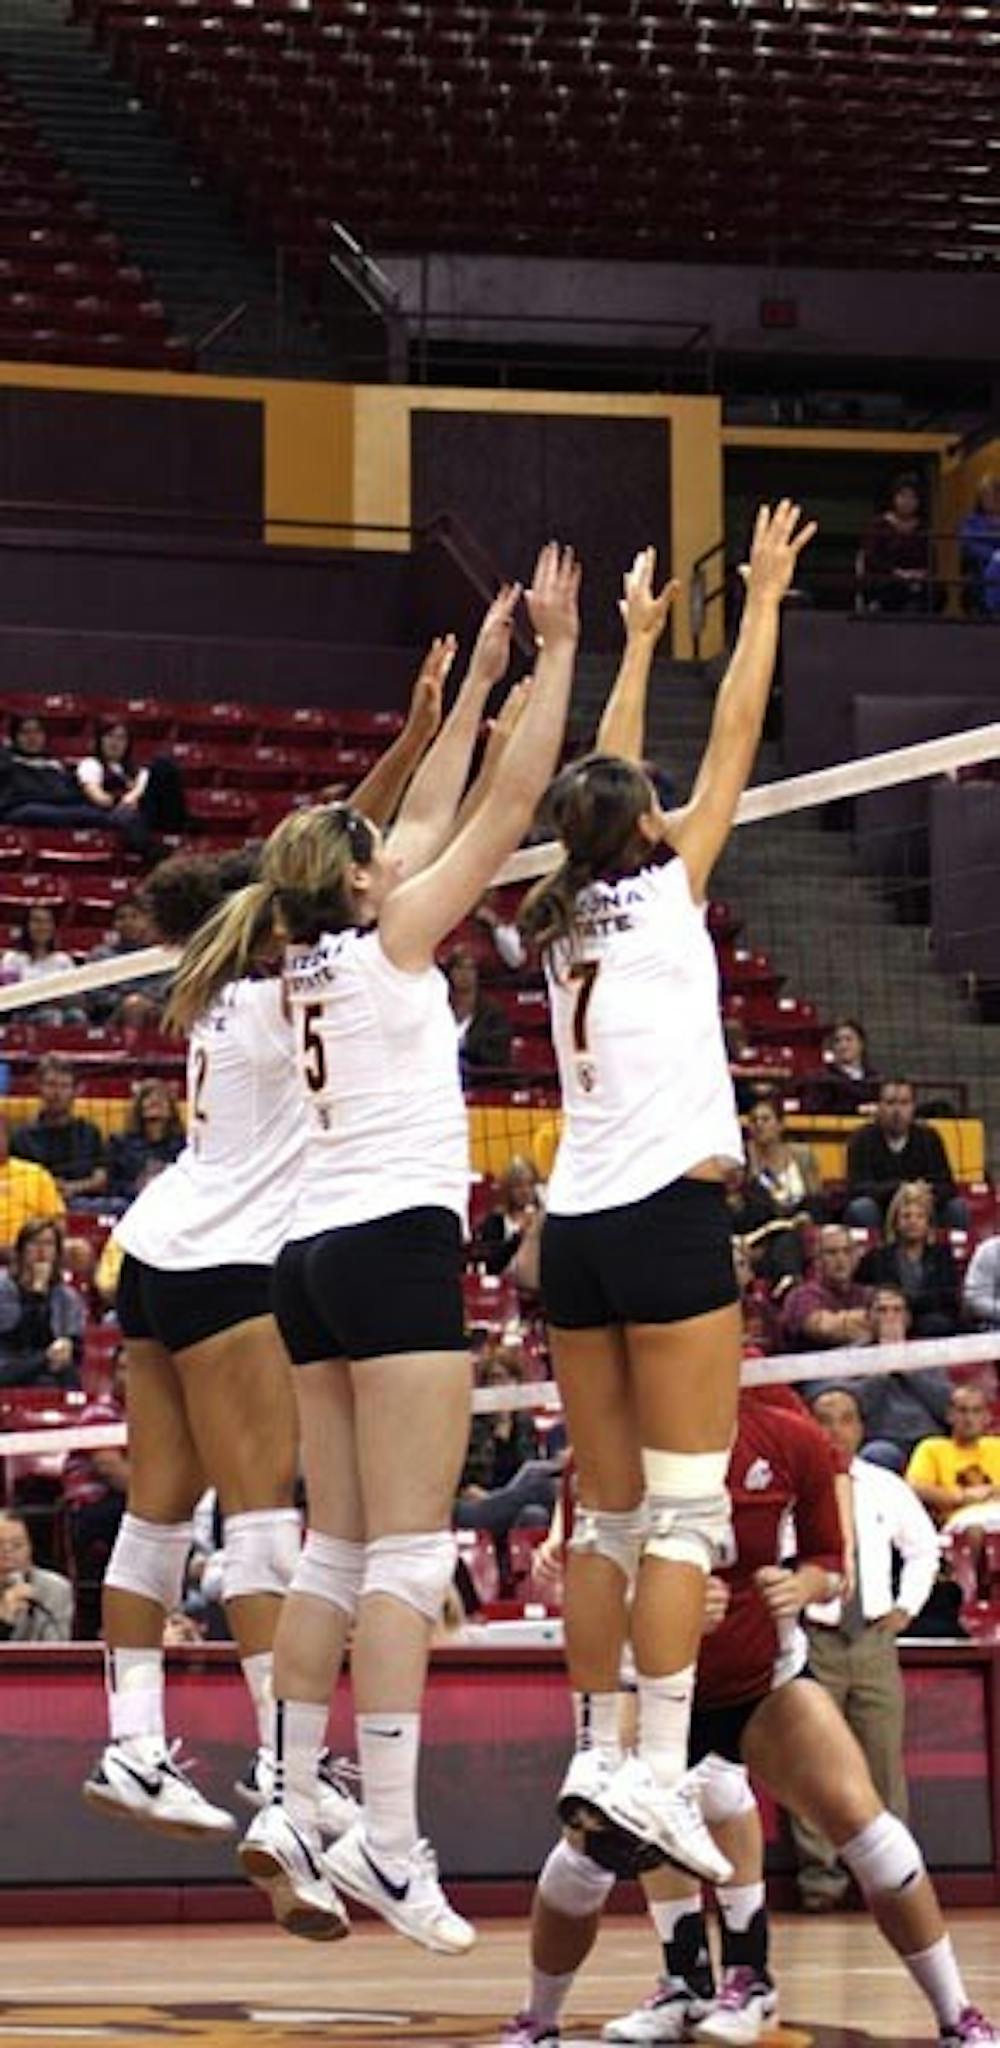 WALL BUILDING: ASU senior outside senior Sarah Reaves (left) goes up for a block with sophomore middle blocker Alexis Pinson (middle) and junior setter Cat Highmark during the Sun Devils 3-1 victory over Washington State on Saturday. It was the last home match of the season for ASU. (Photo by Rosie Gochnour)